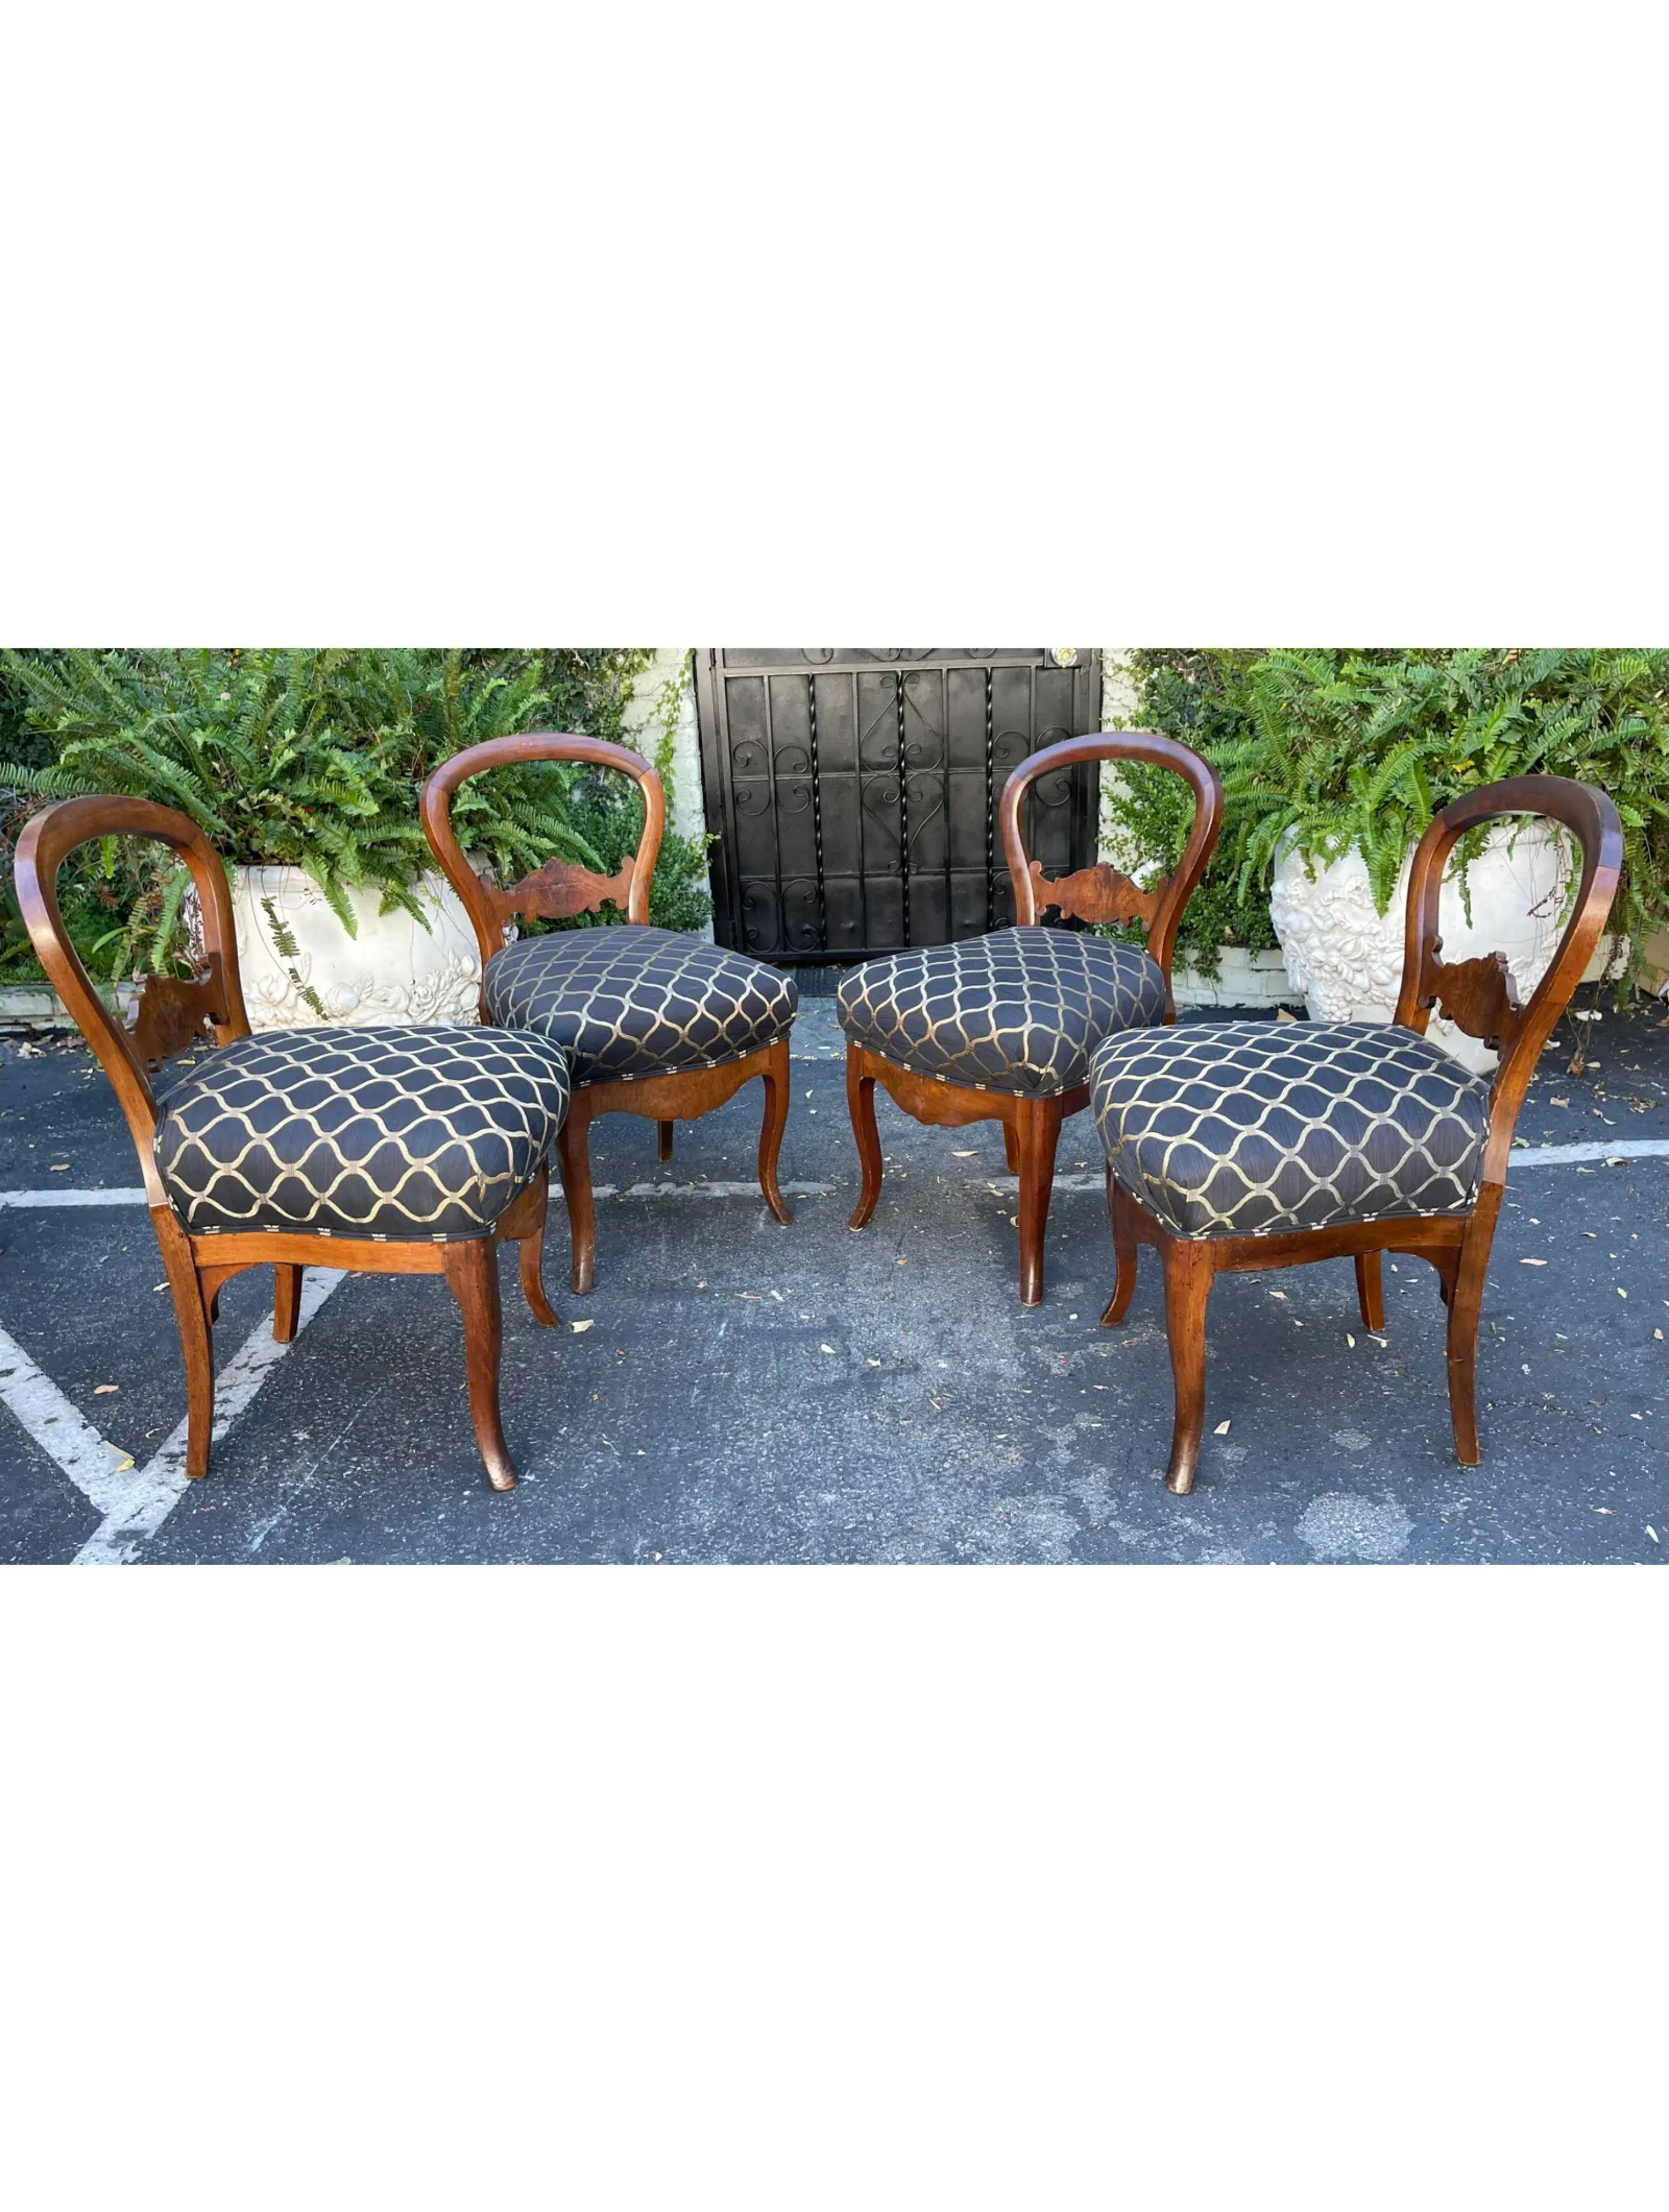 Antique Regency Period Mahogany Dining Chairs, Early 19th Century For Sale 3